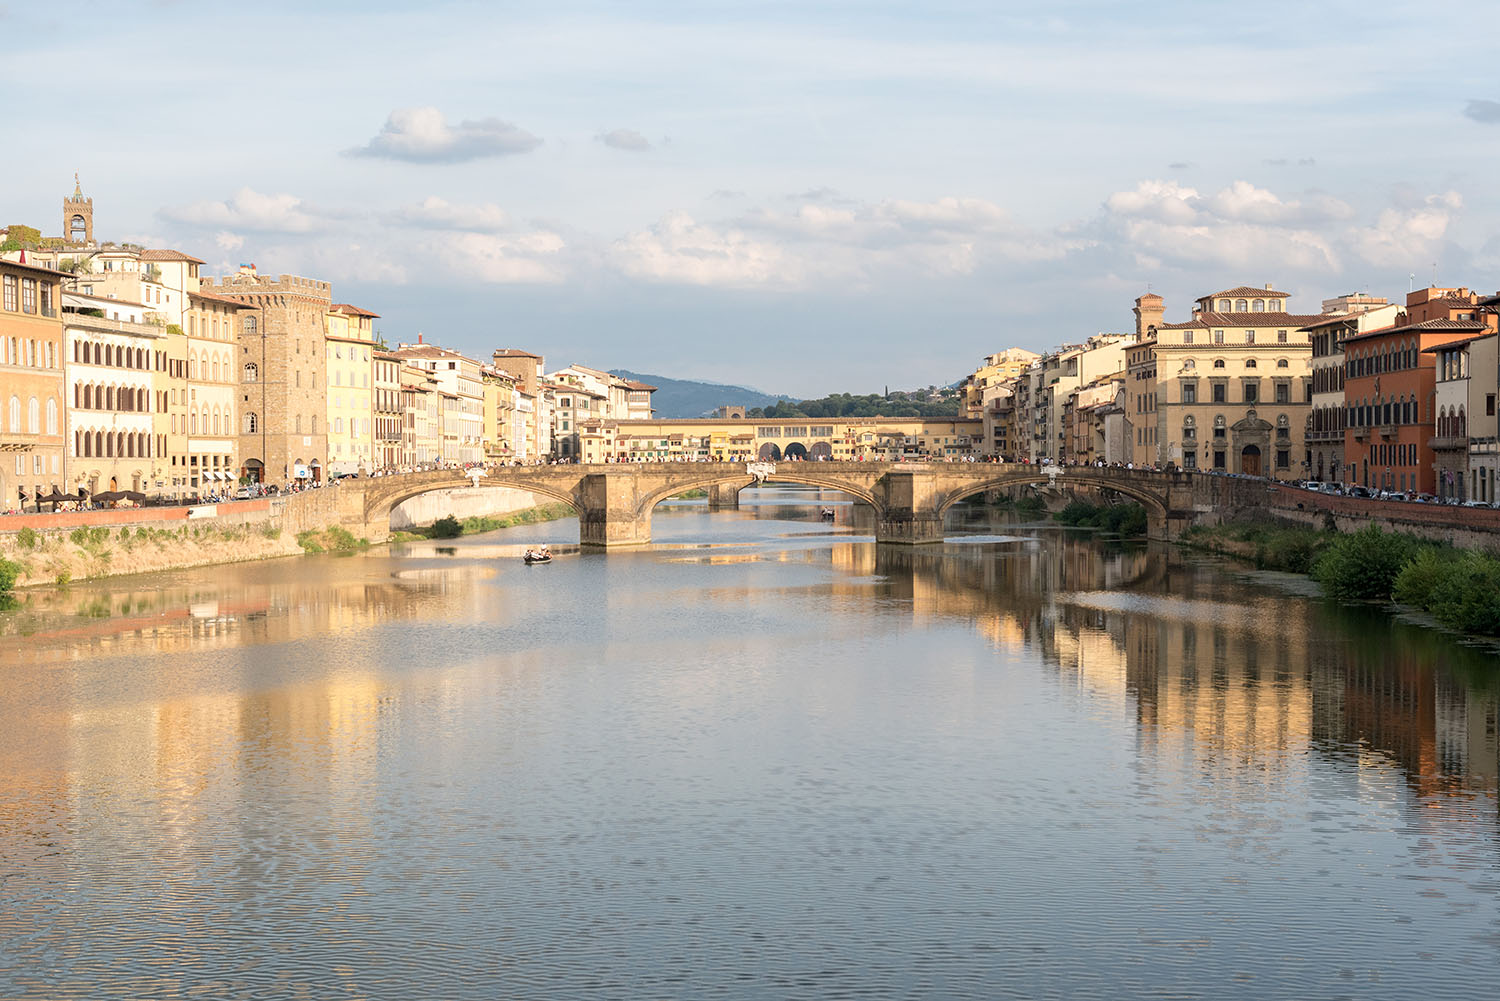 The bridges of Florence, Italy, as captured by top Canadian travel blogger Cee Fardoe of Coco & Vera